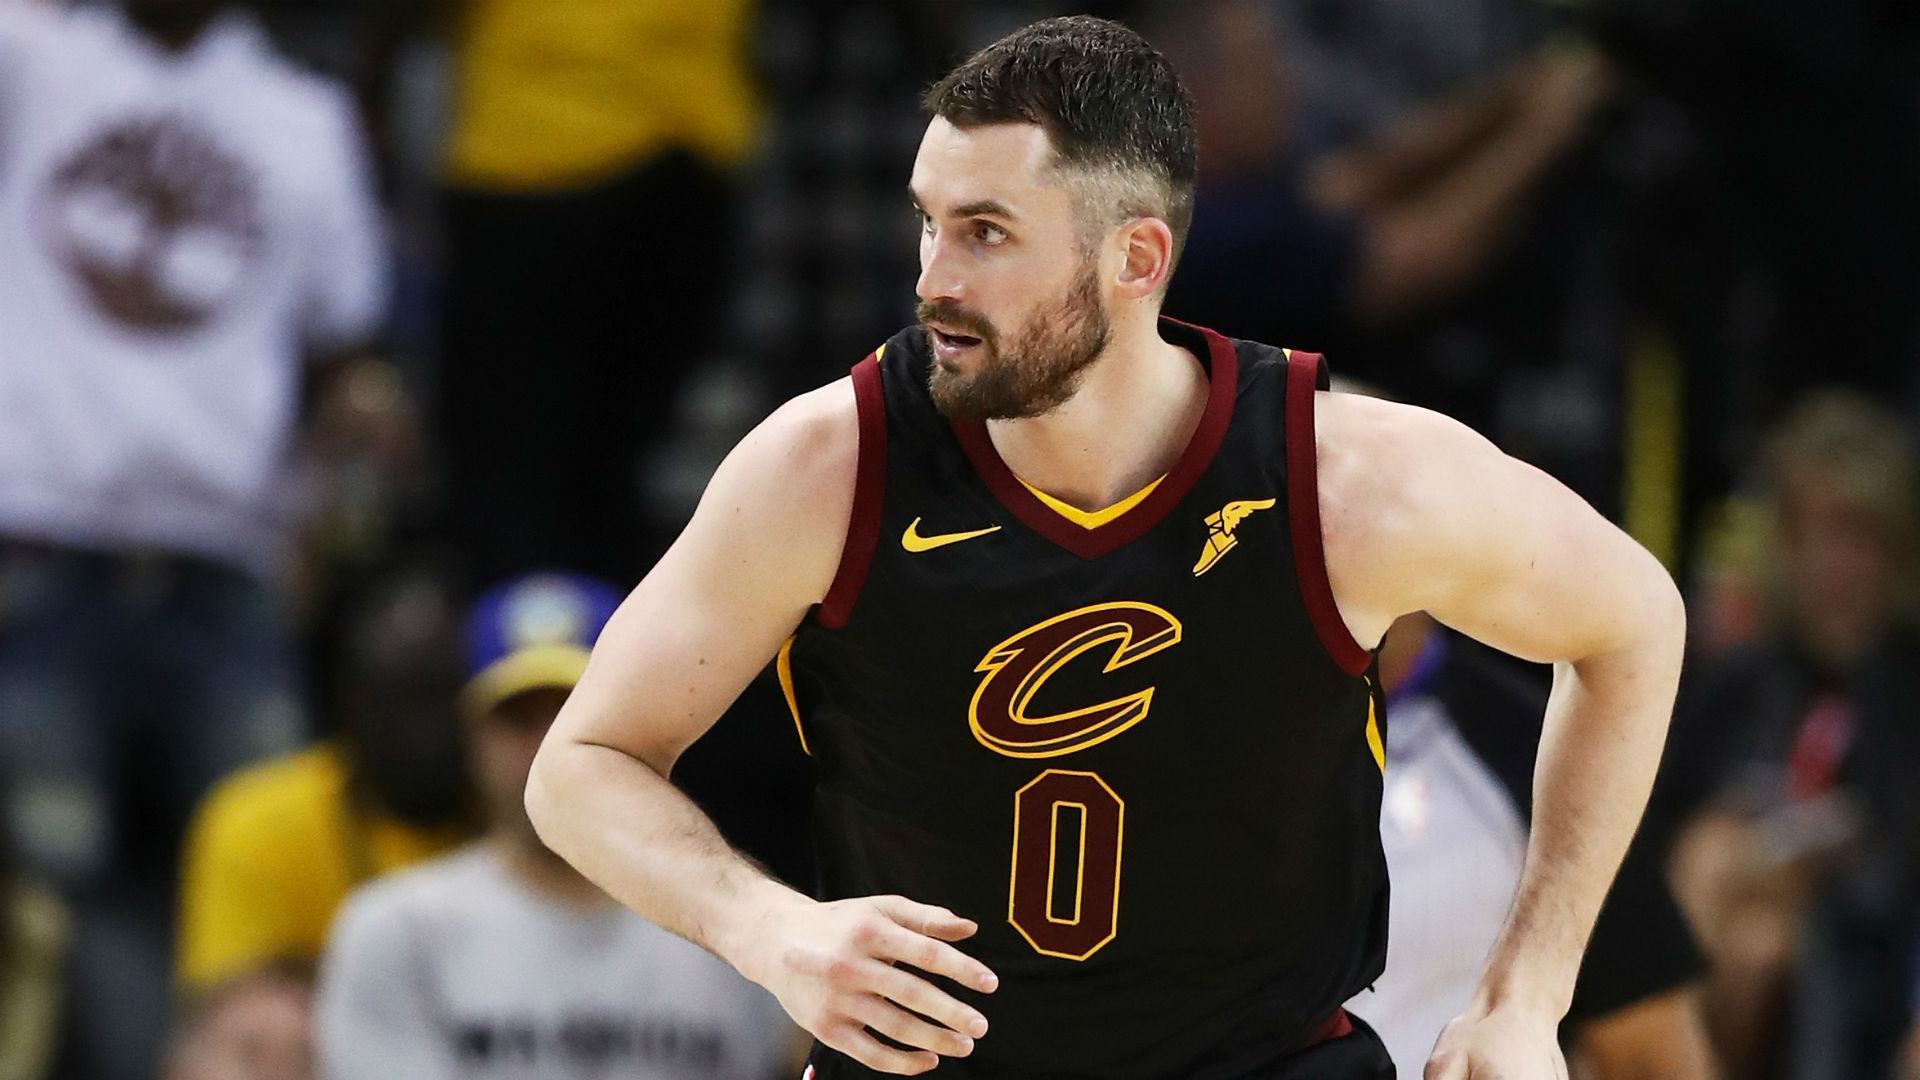 LeBron James' decision on his future will likely impact Kevin Love, who would like to remain his team-mate for the rest of his career.